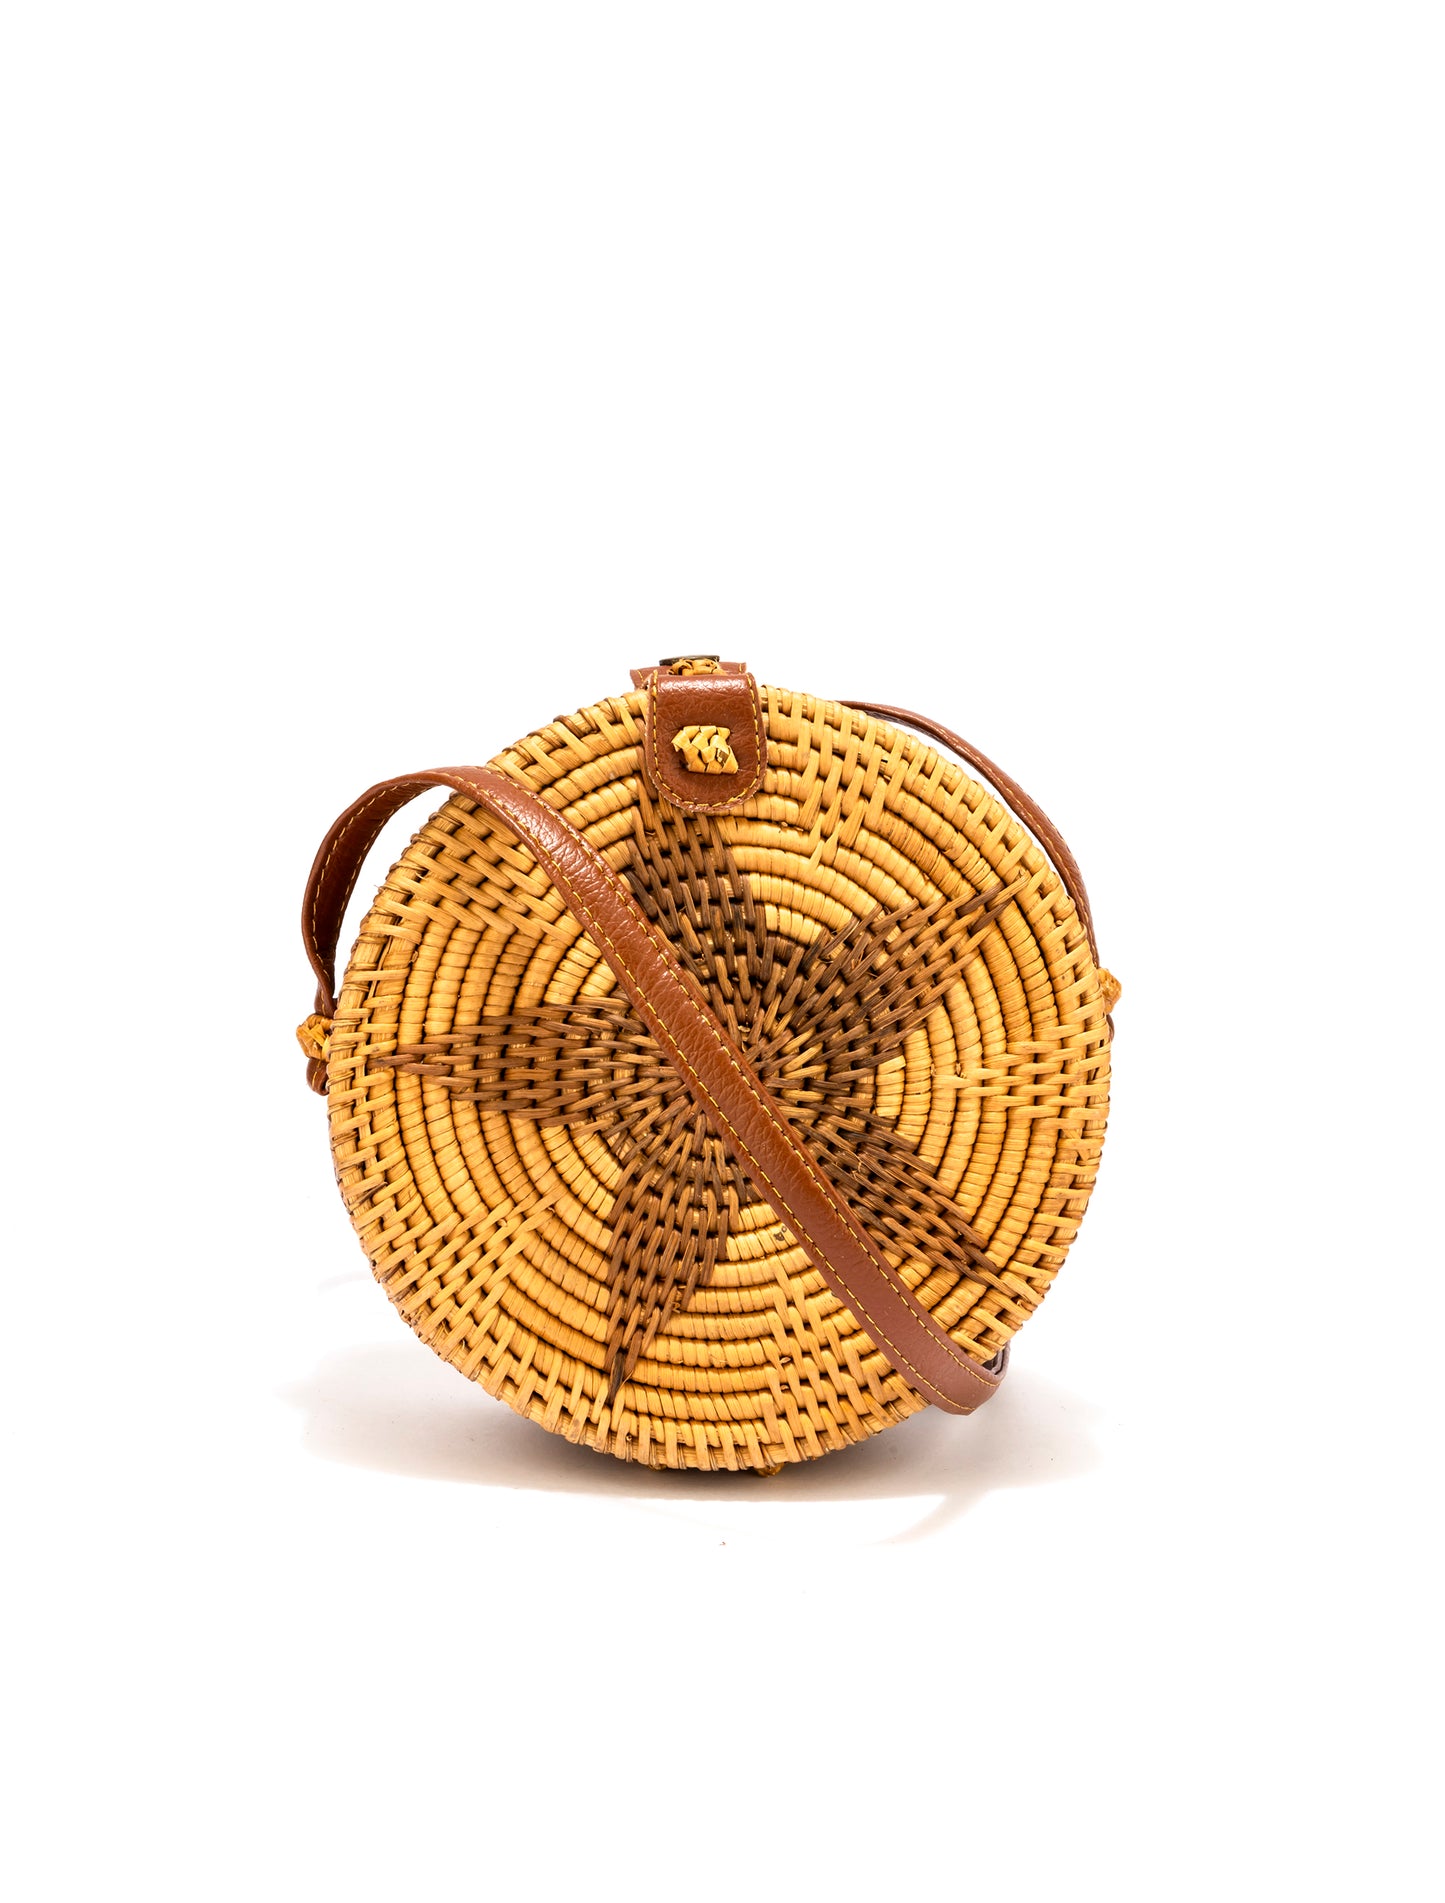 Handwoven Round Boho Bag Shoulder Crossbody Bag Natural Woven Straw Tote Bag with Leather Straps for Ladies Women